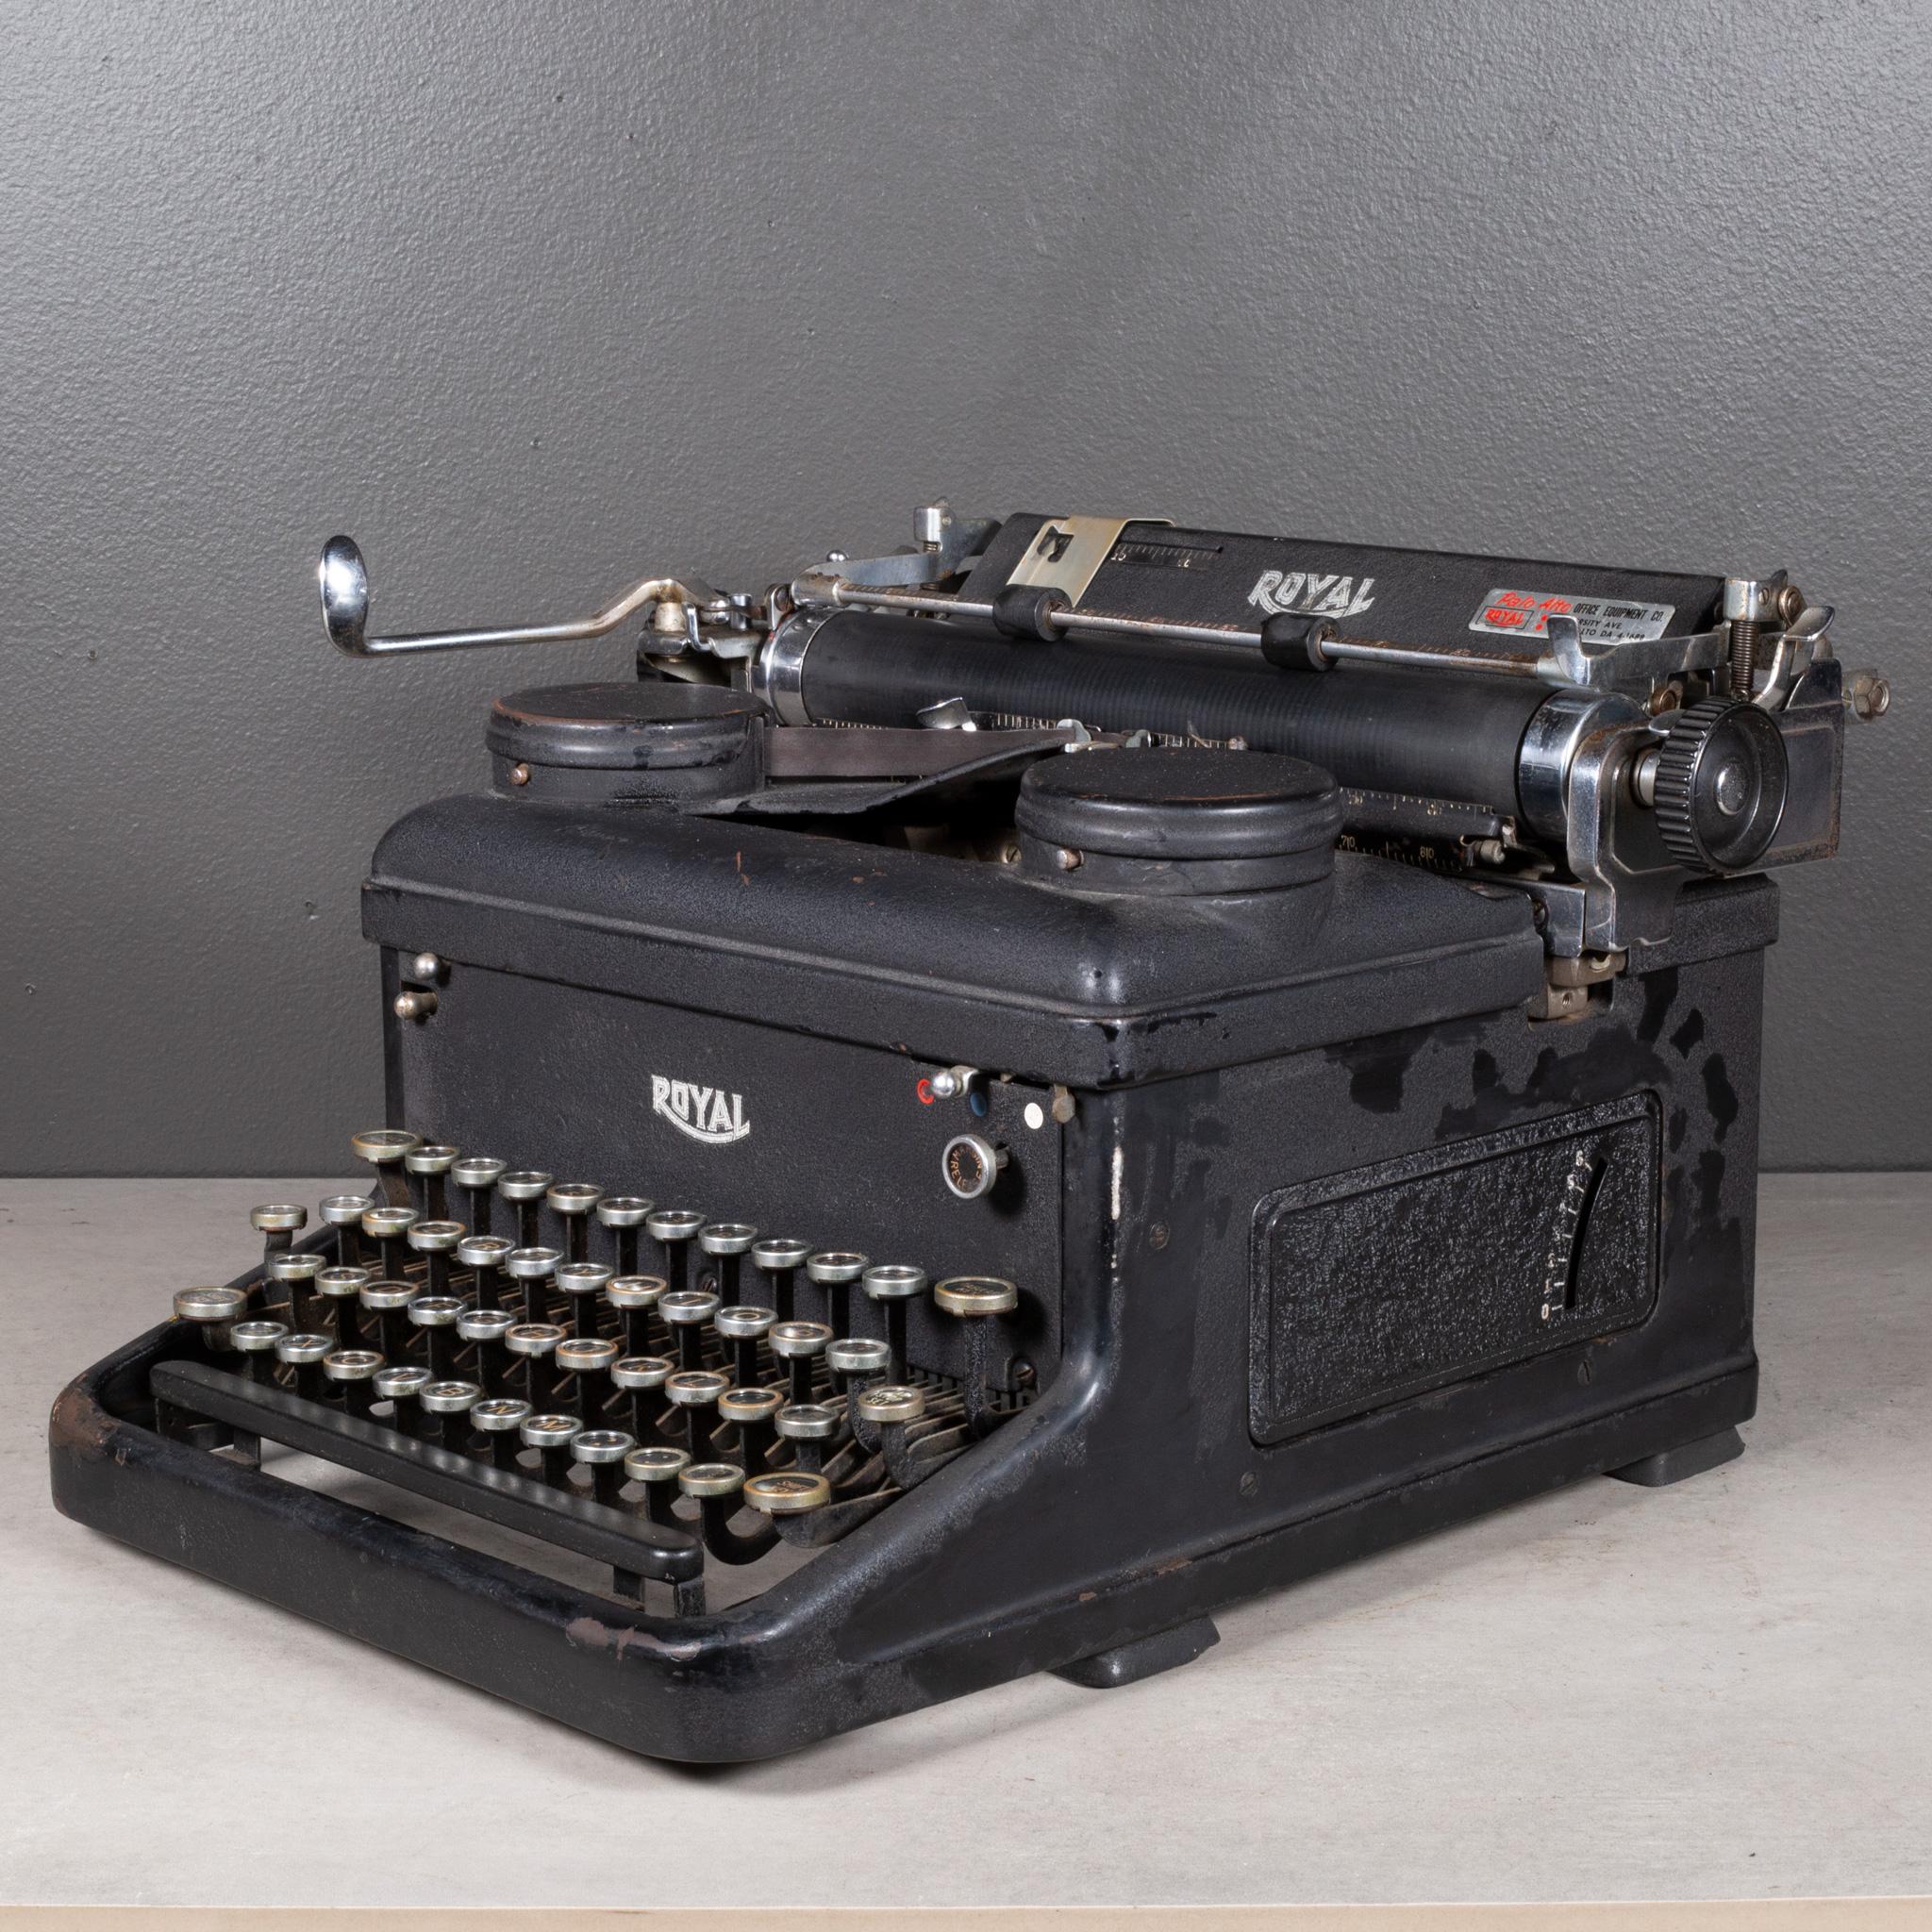 ABOUT

An antique Royal typewriter with black crinkle finish. Lift up lid with gull wings. The keys are glass with black and gold letters. This typewriter has smooth typing, the carriage and space bar function well and the ribbon is still fairly